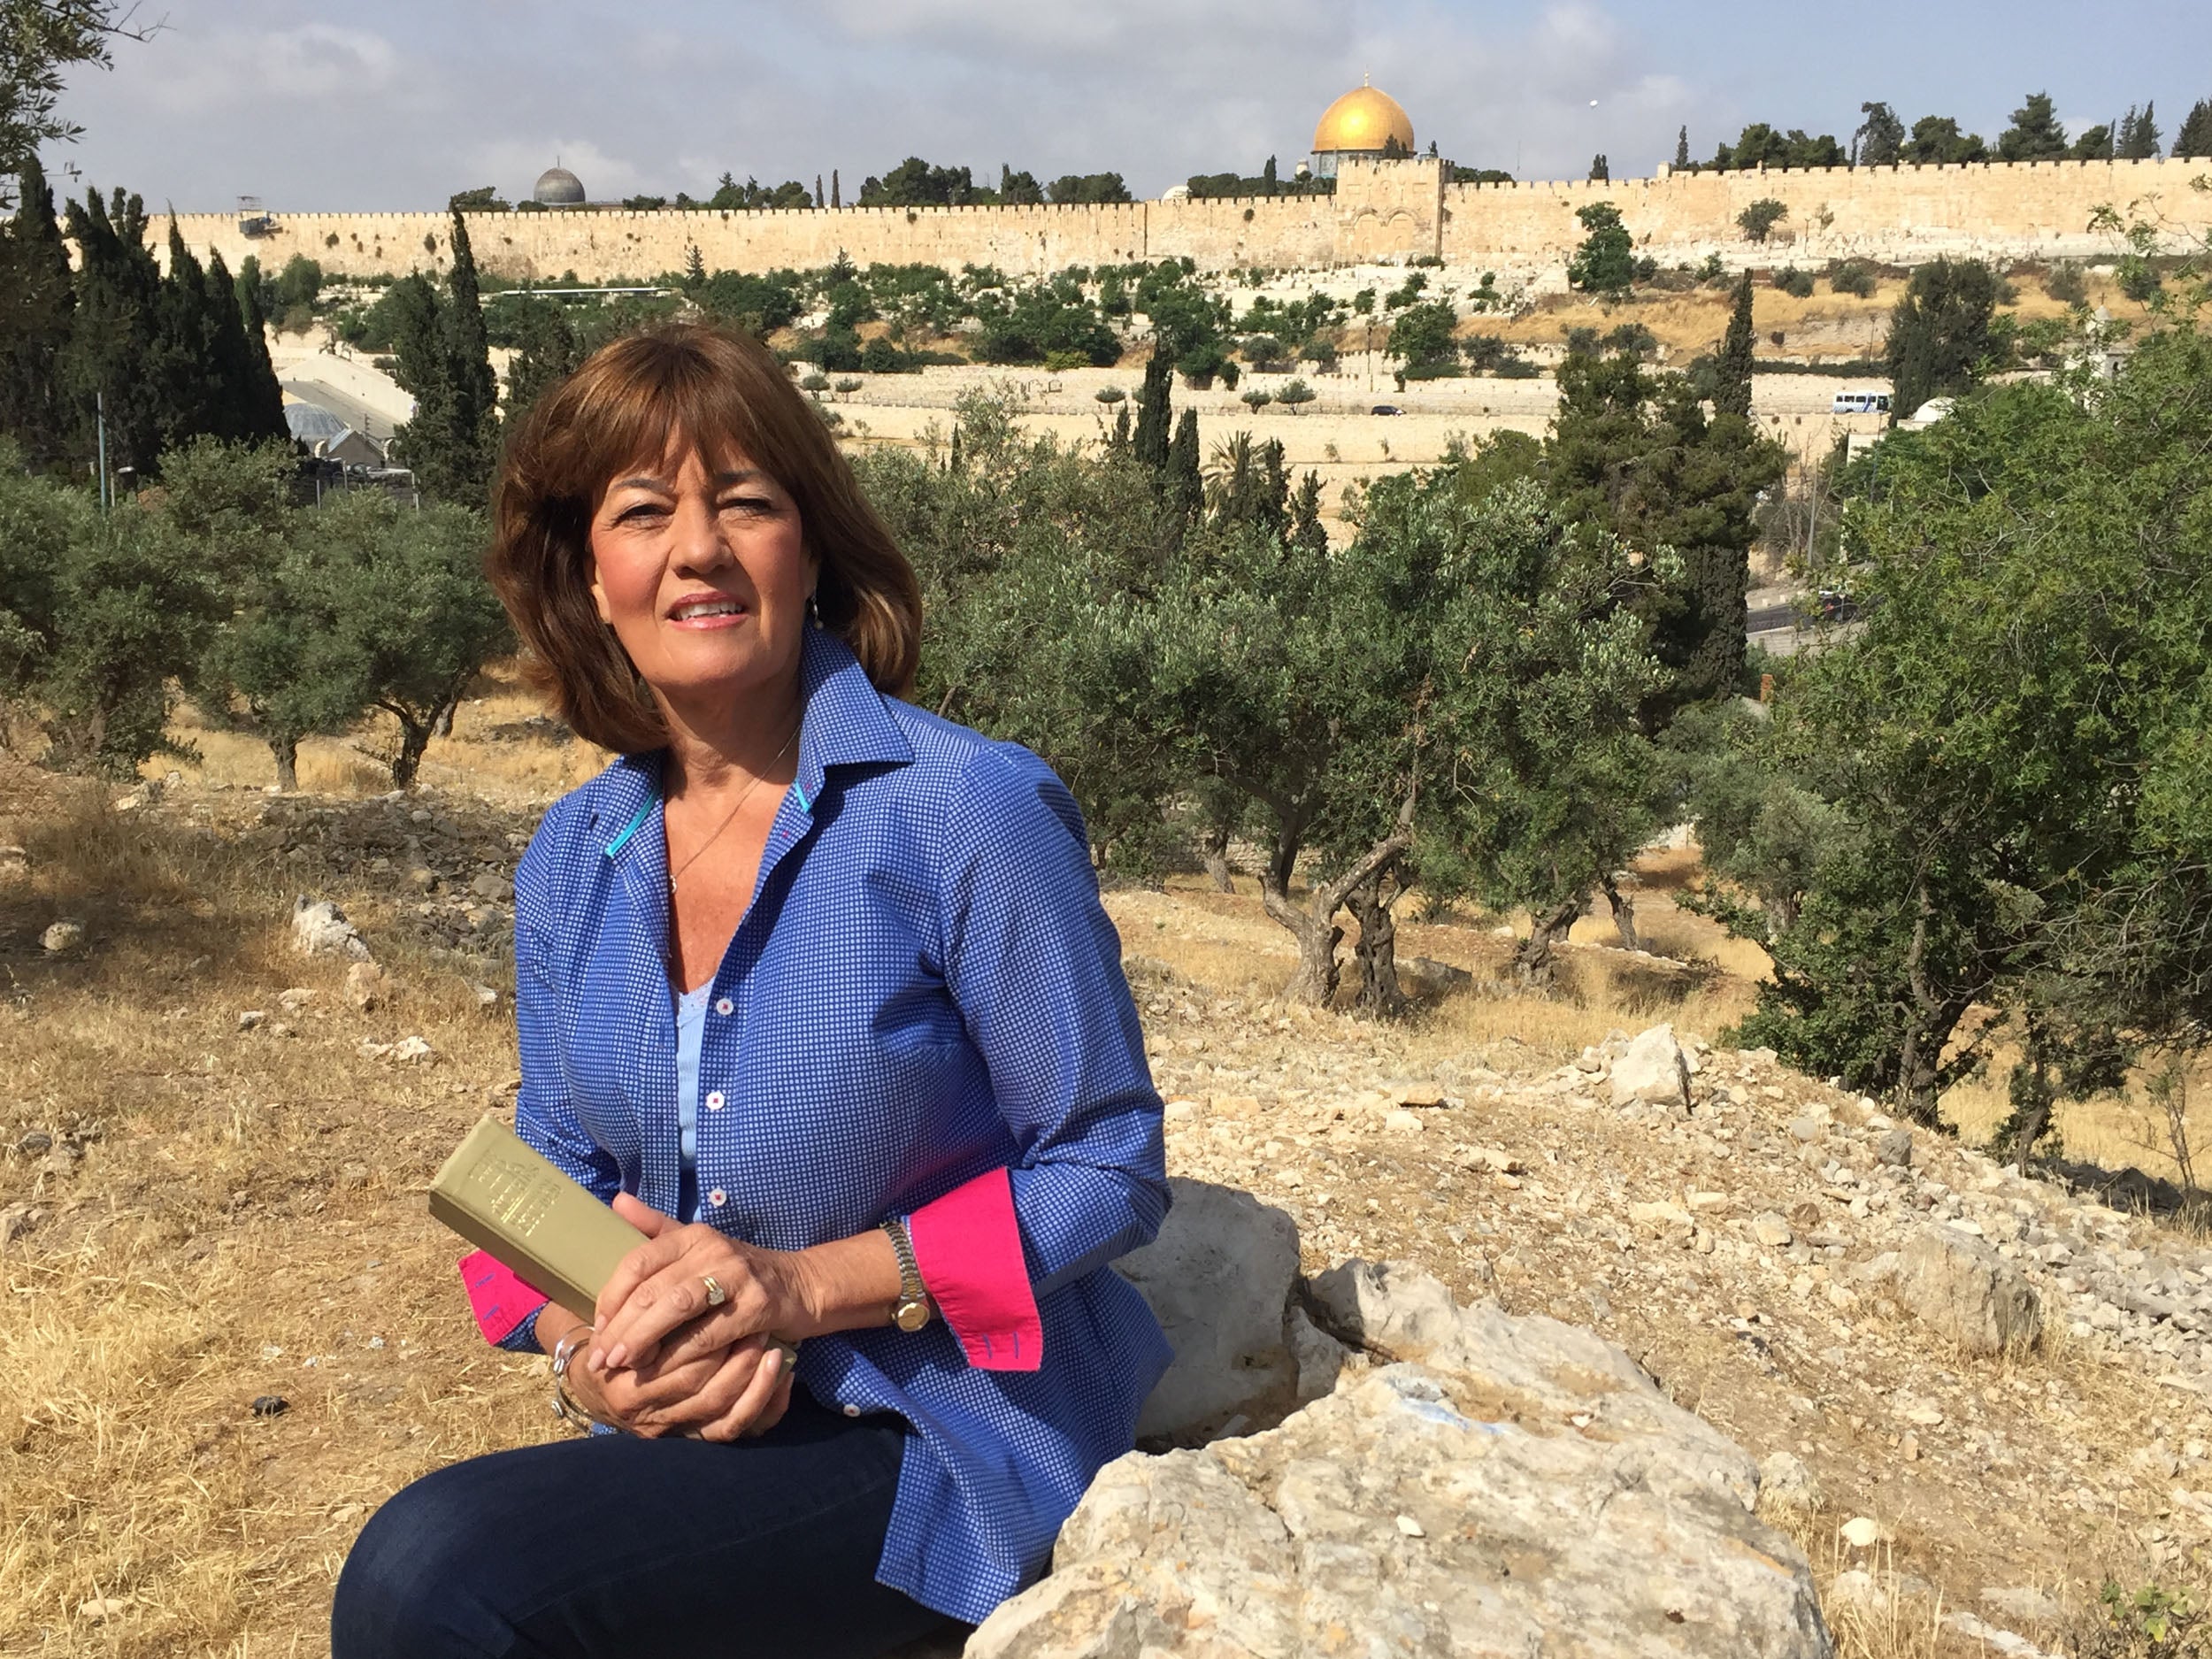 Jane Corbin offers her view, based on long experience, that the spirit of the Balfour declaration, with its acknowledgement of both Jewish and Arab aspirations and rights, was far-sighted